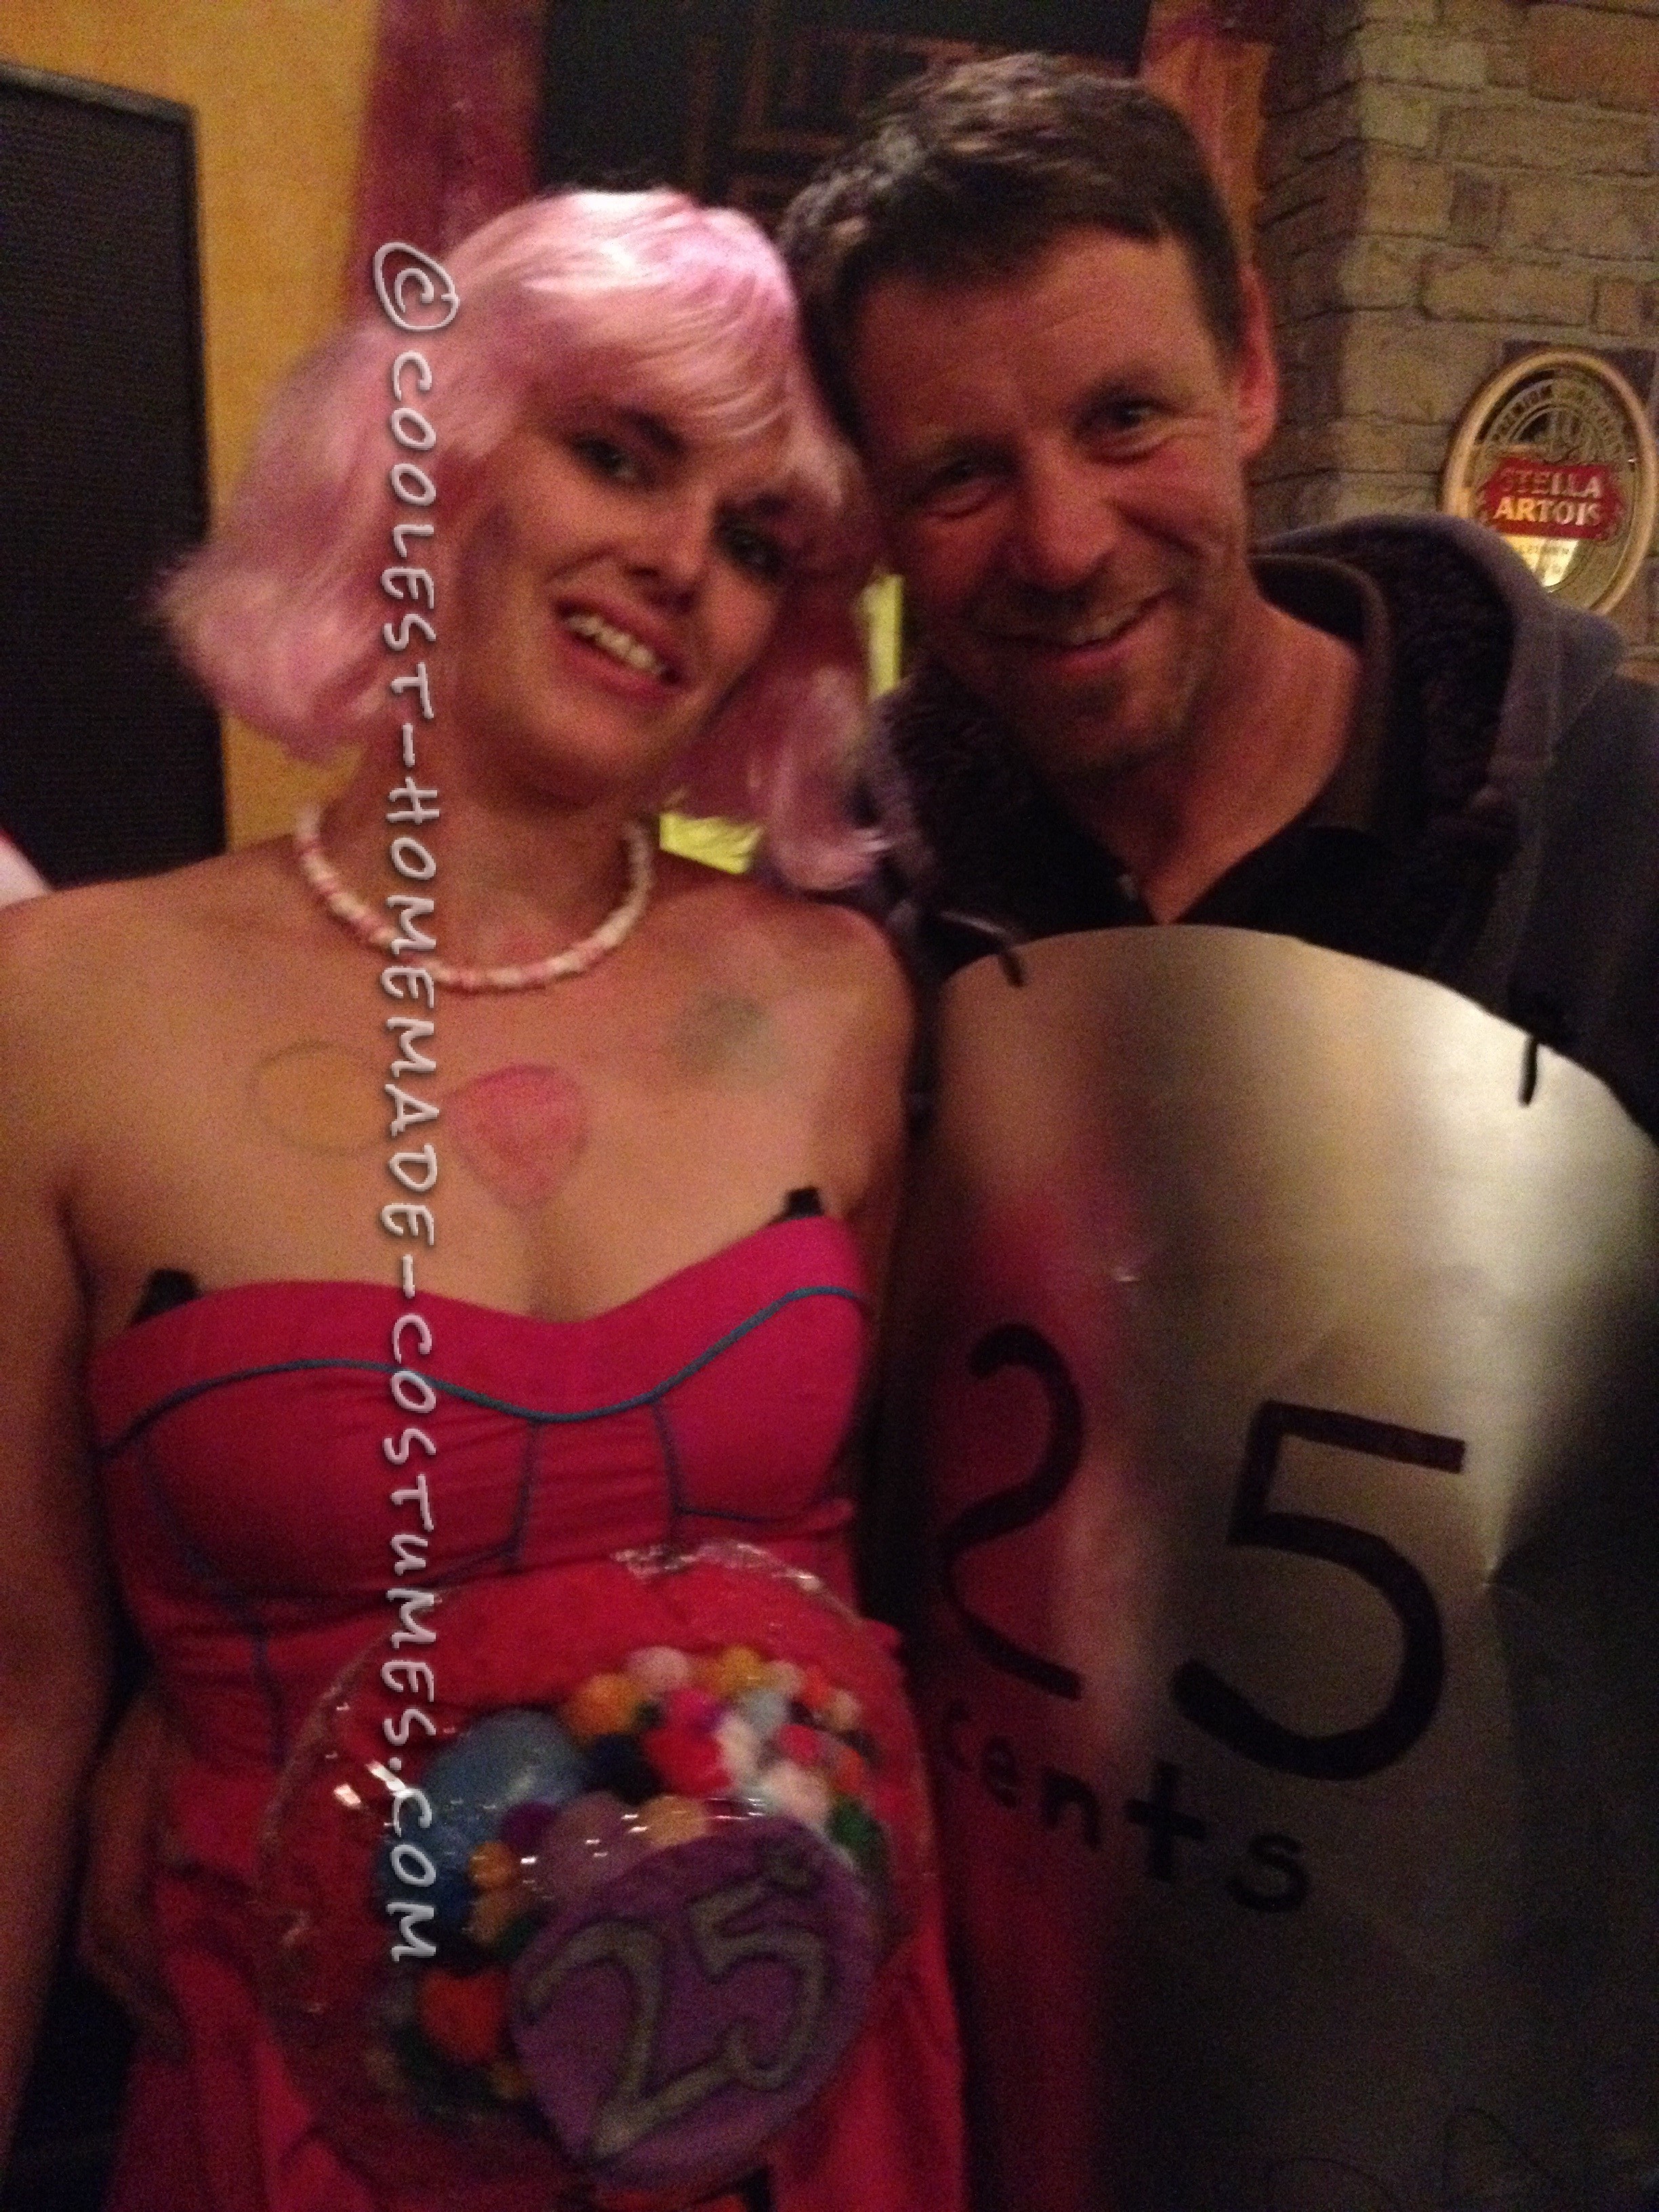 Cool Gumball Machine and 25 Cent Coin Couple Halloween Costume